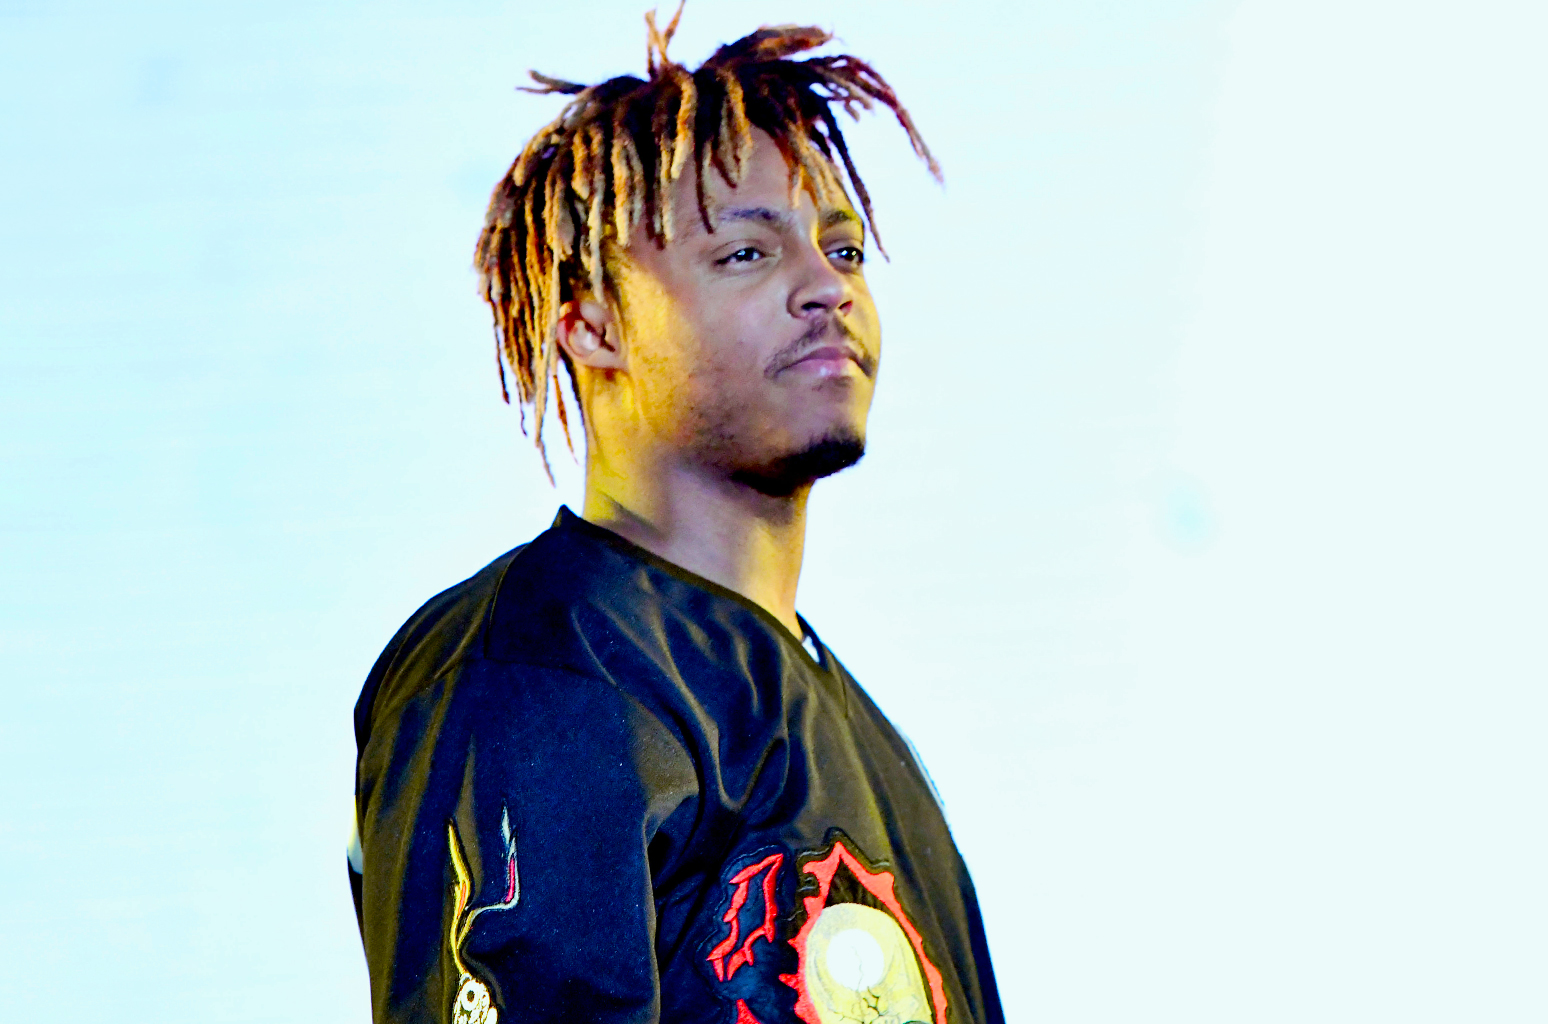 JUICE WRLD Dead At 21 After Suffering Seizure - Hip Hop News - The Daily Loud1548 x 1024